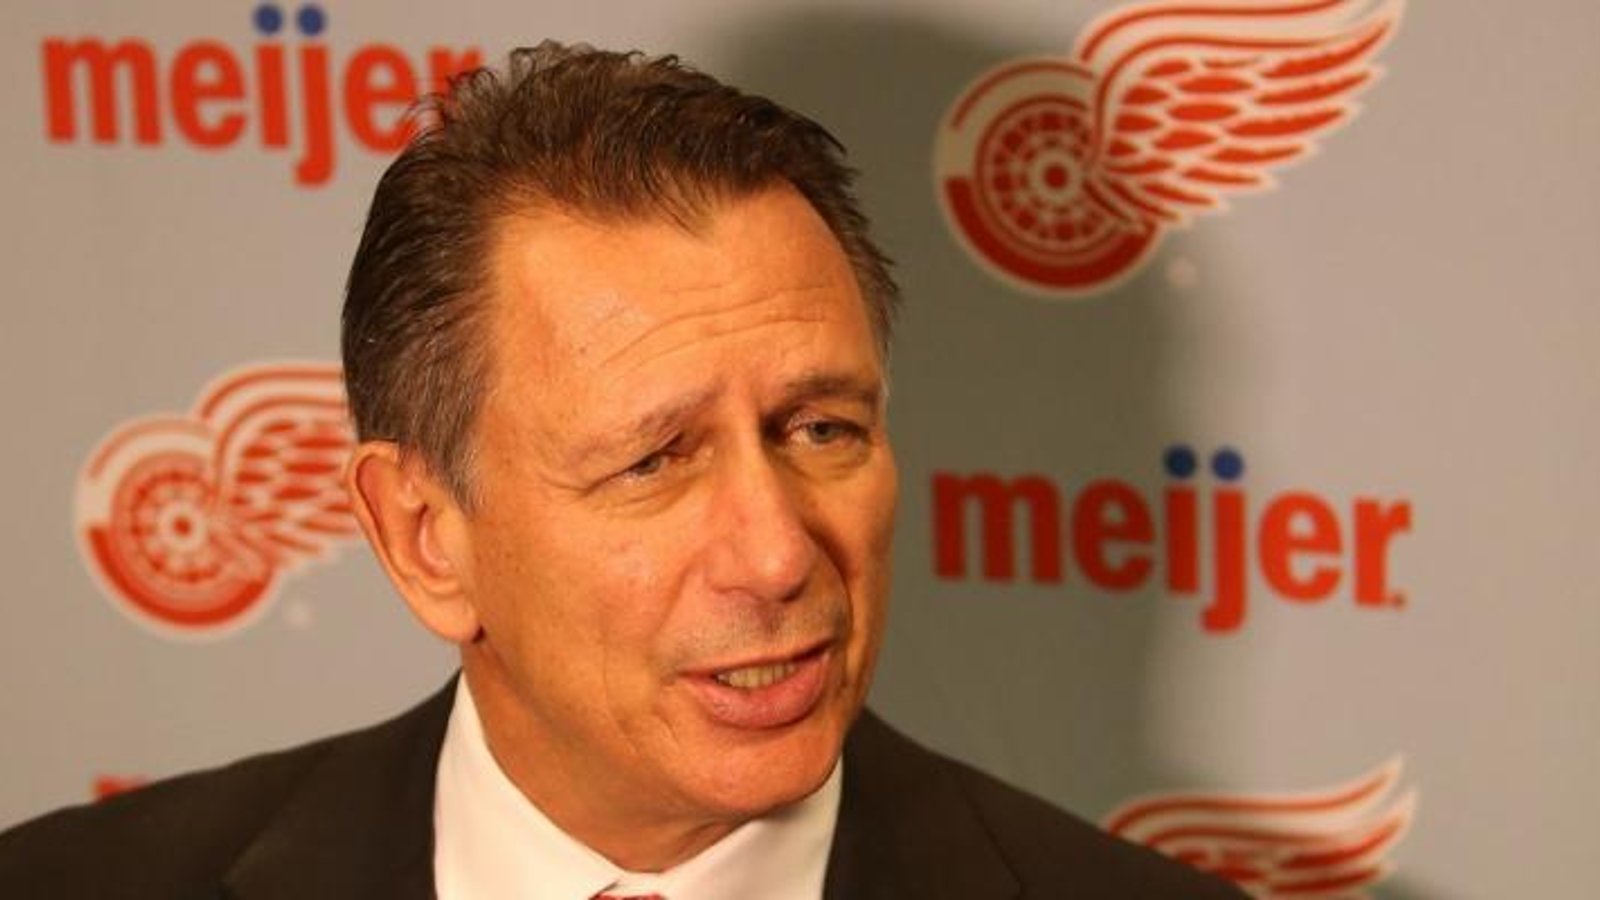 Breaking: Red Wings GM Ken Holland announces big changes behind the bench.